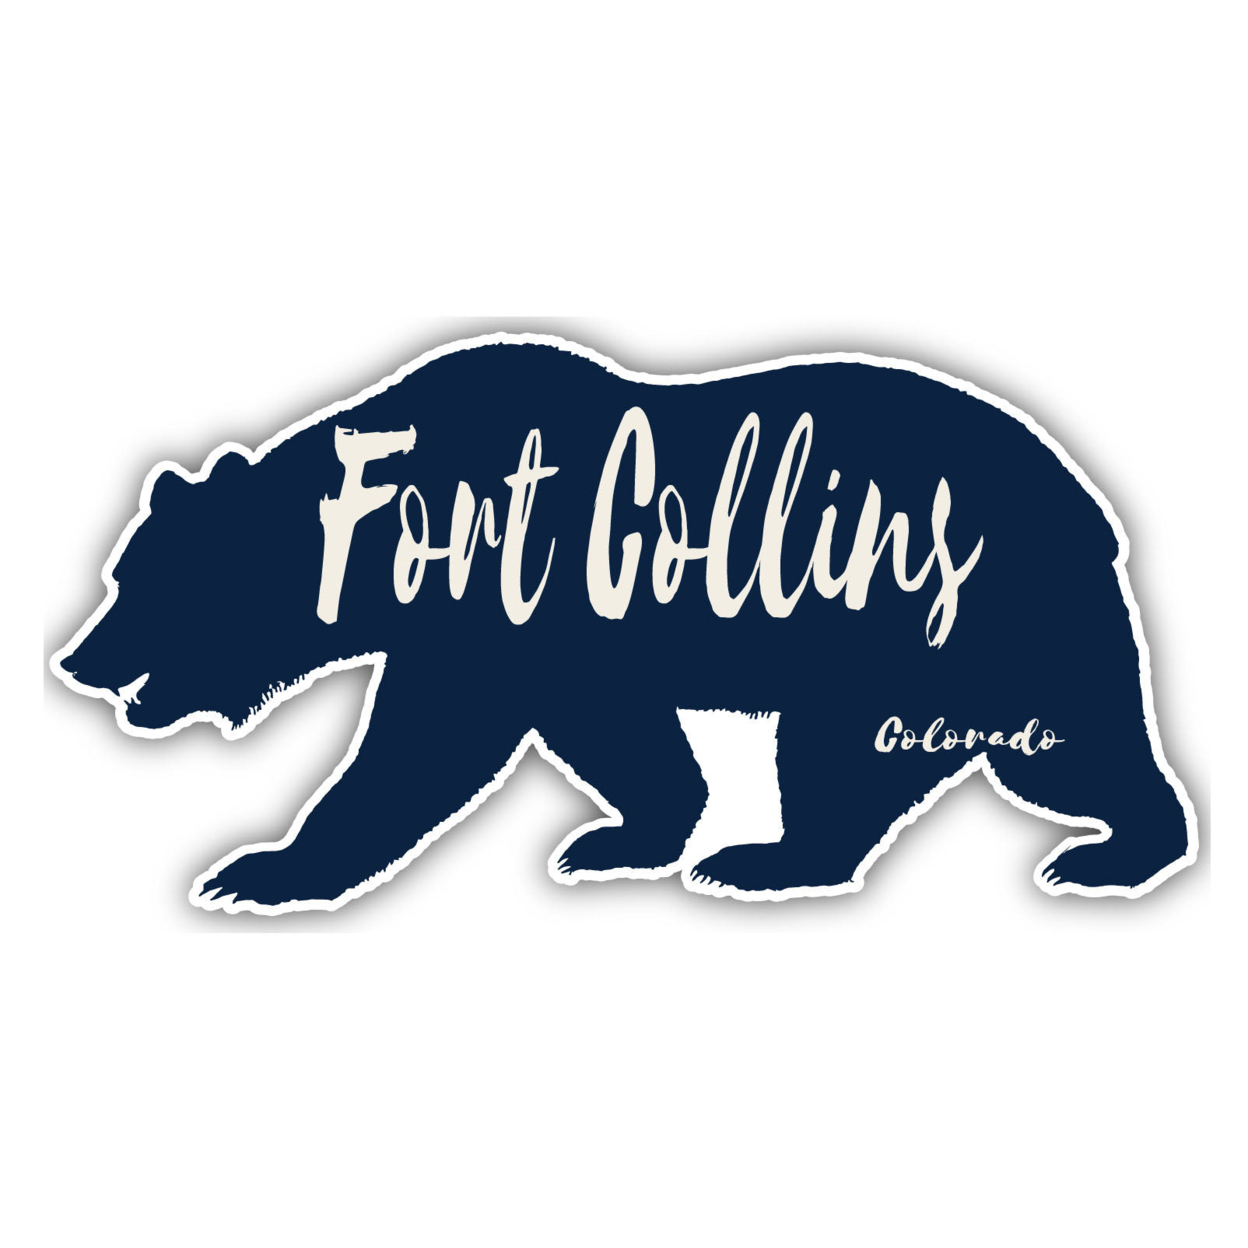 Fort Collins Colorado Souvenir Decorative Stickers (Choose Theme And Size) - 4-Pack, 8-Inch, Bear